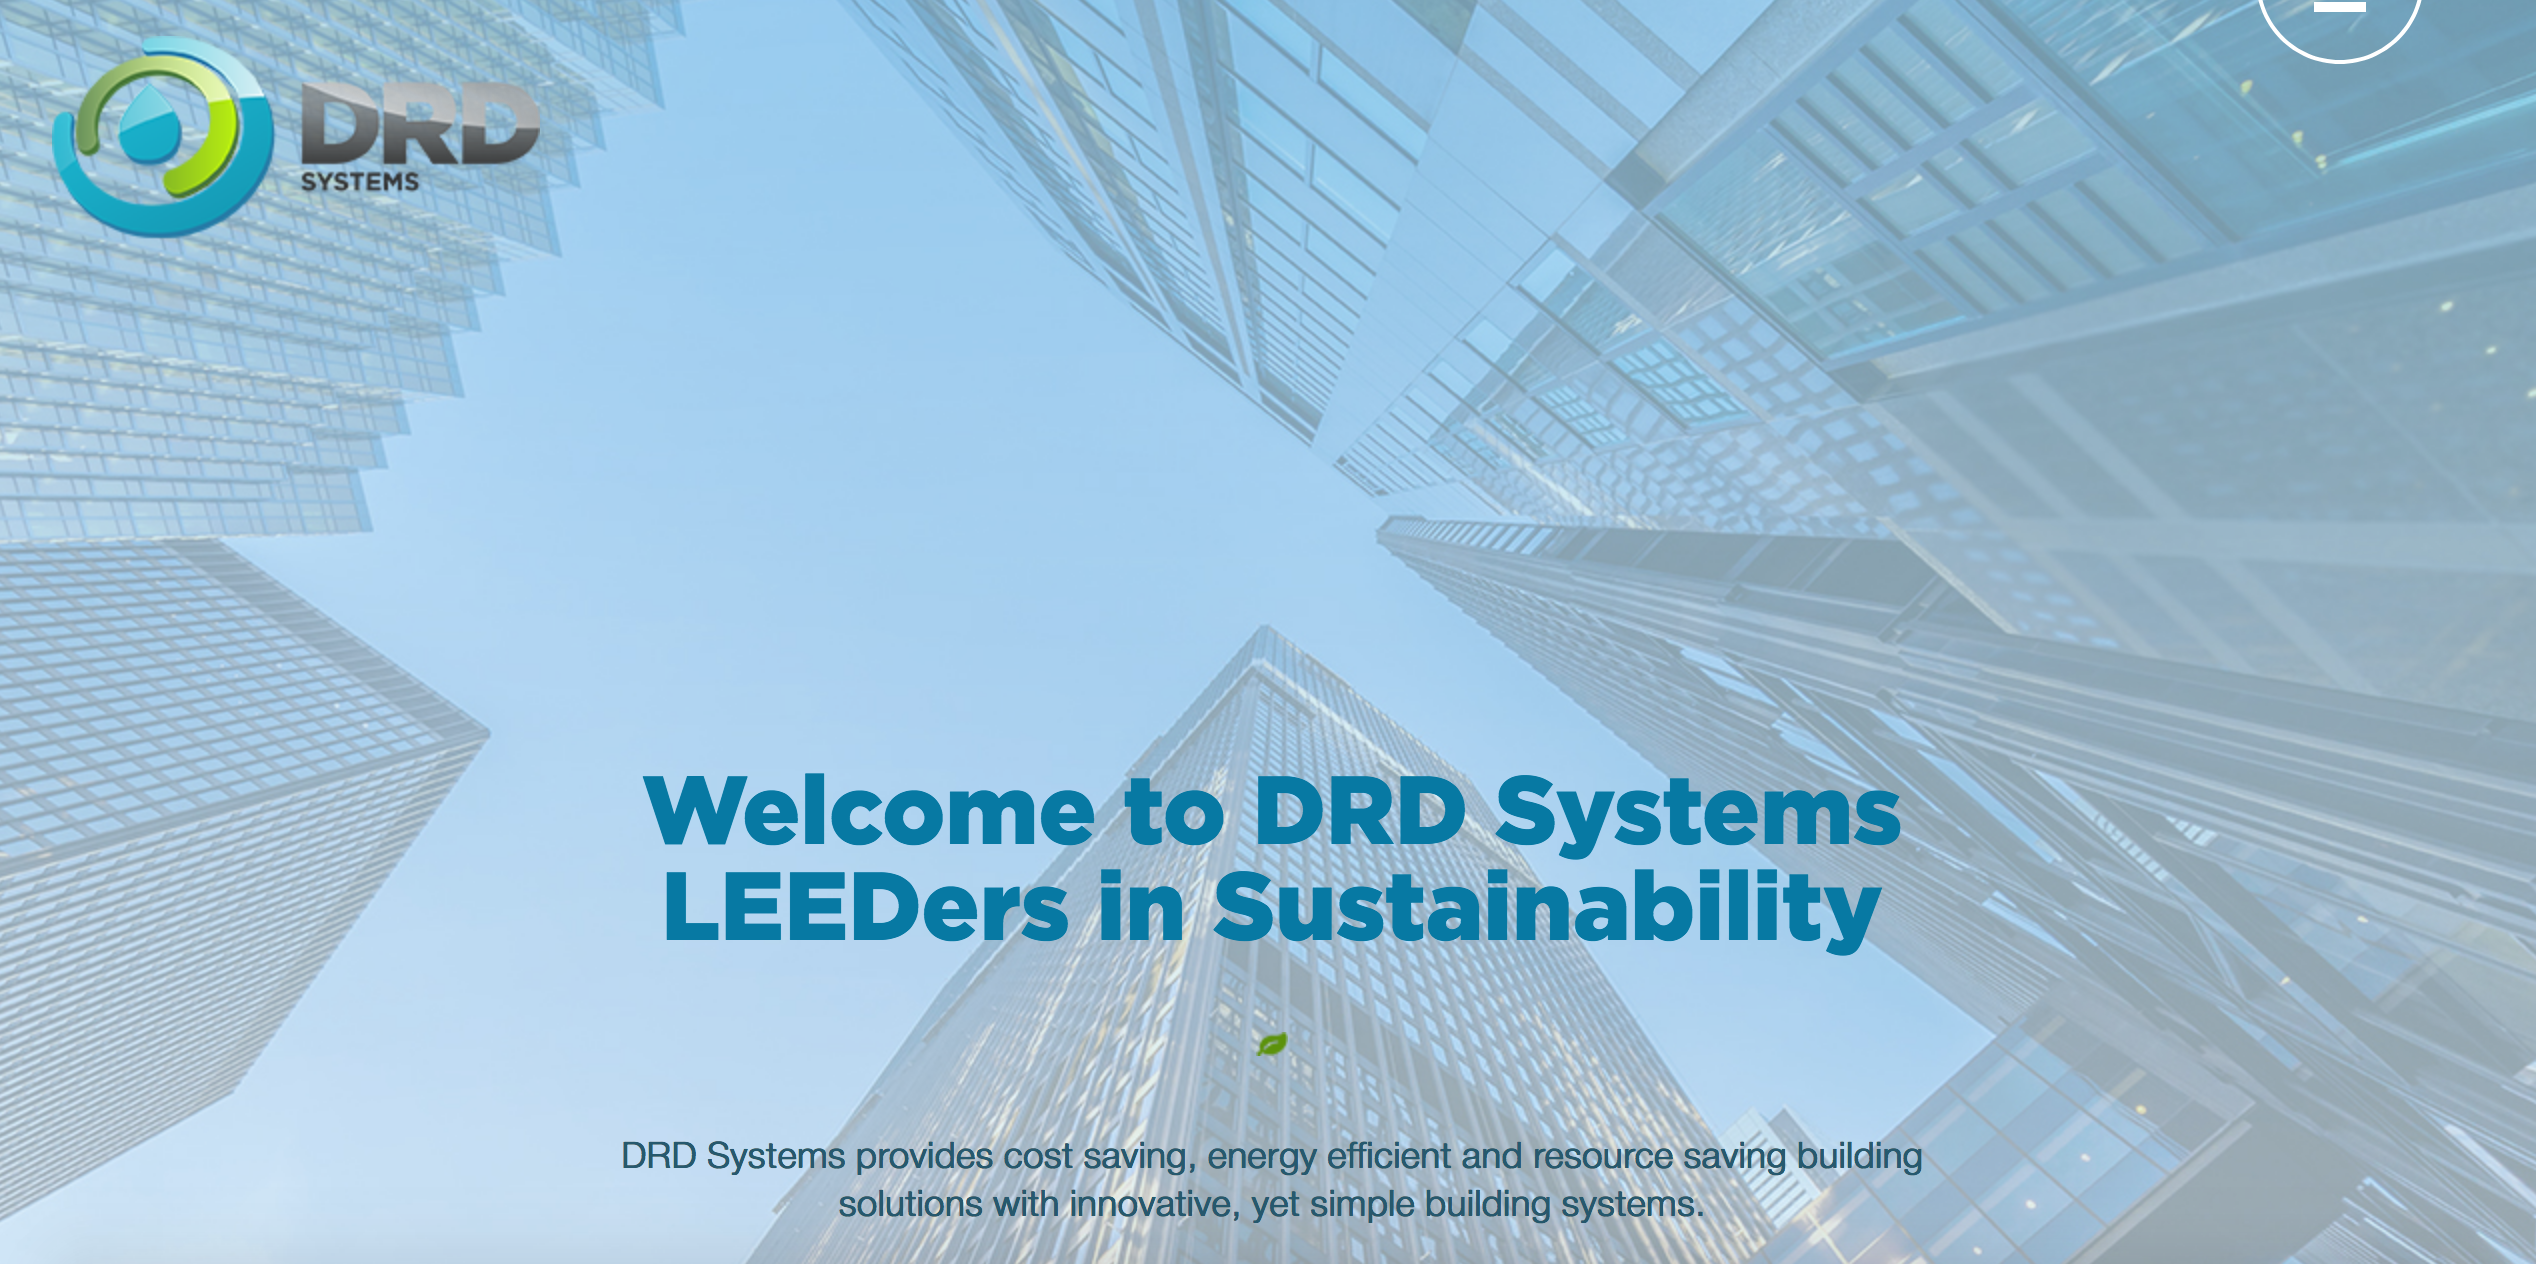 DRD Systems